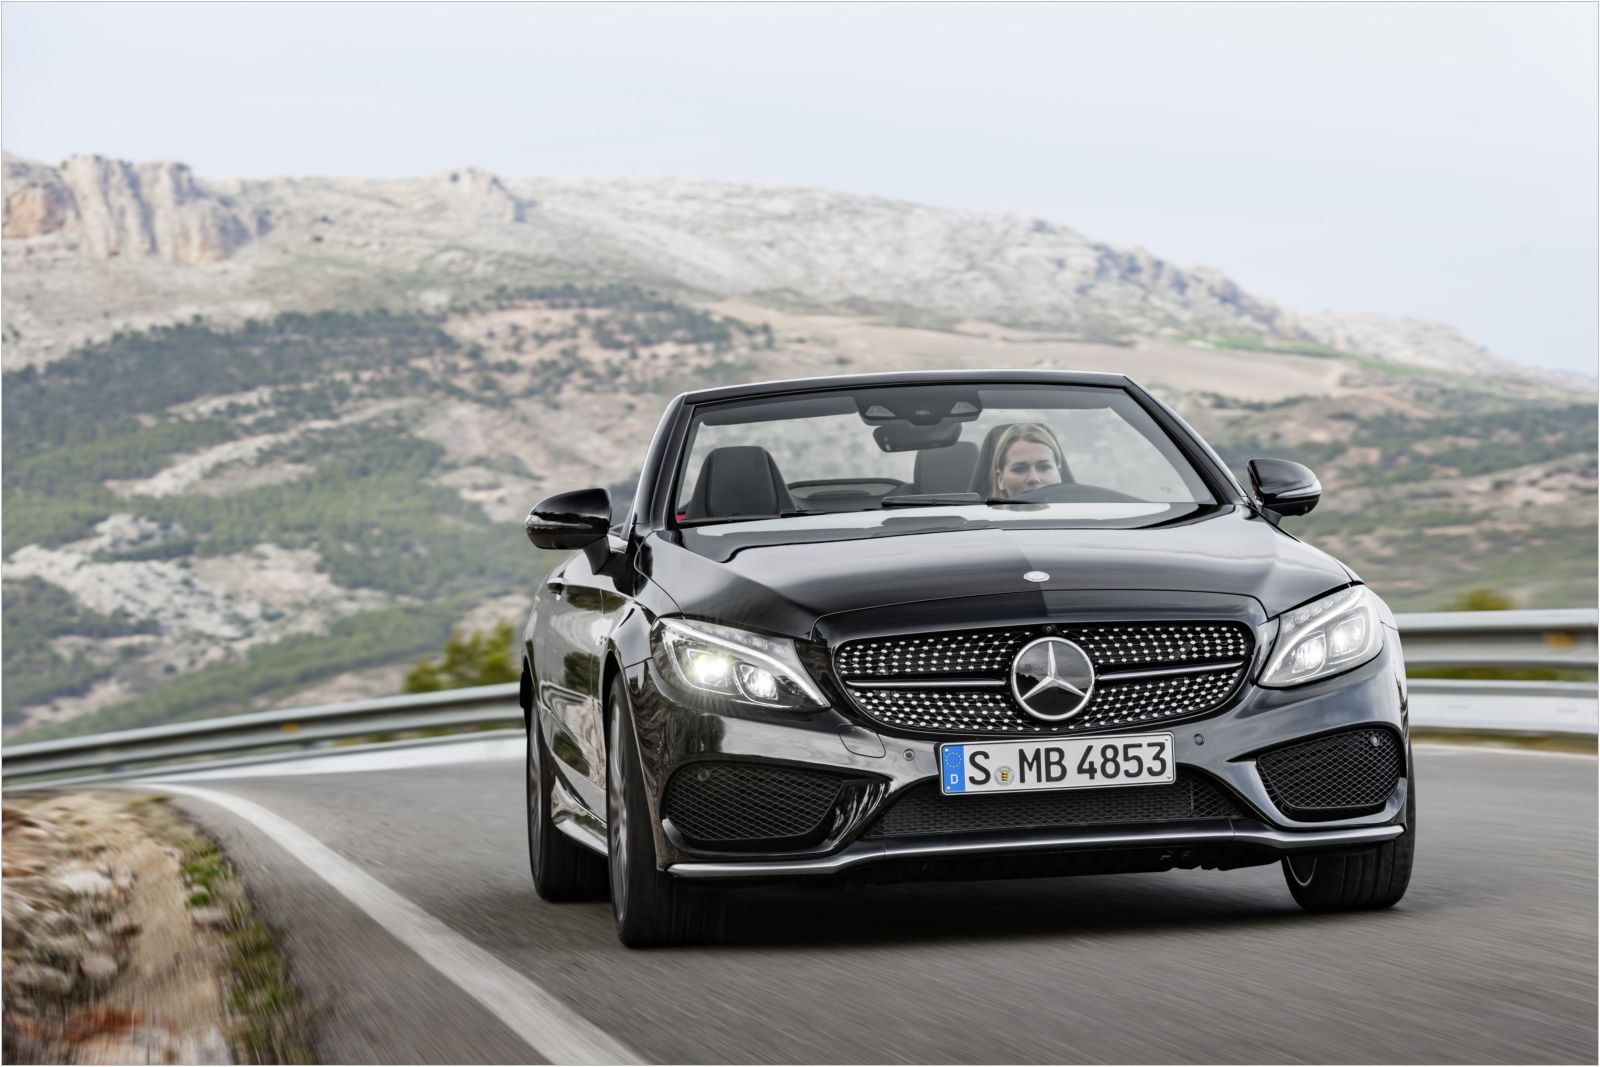 Mercedes-Benz C43 AMG 4Matic Cabriolet, 1600x1067px, img-3